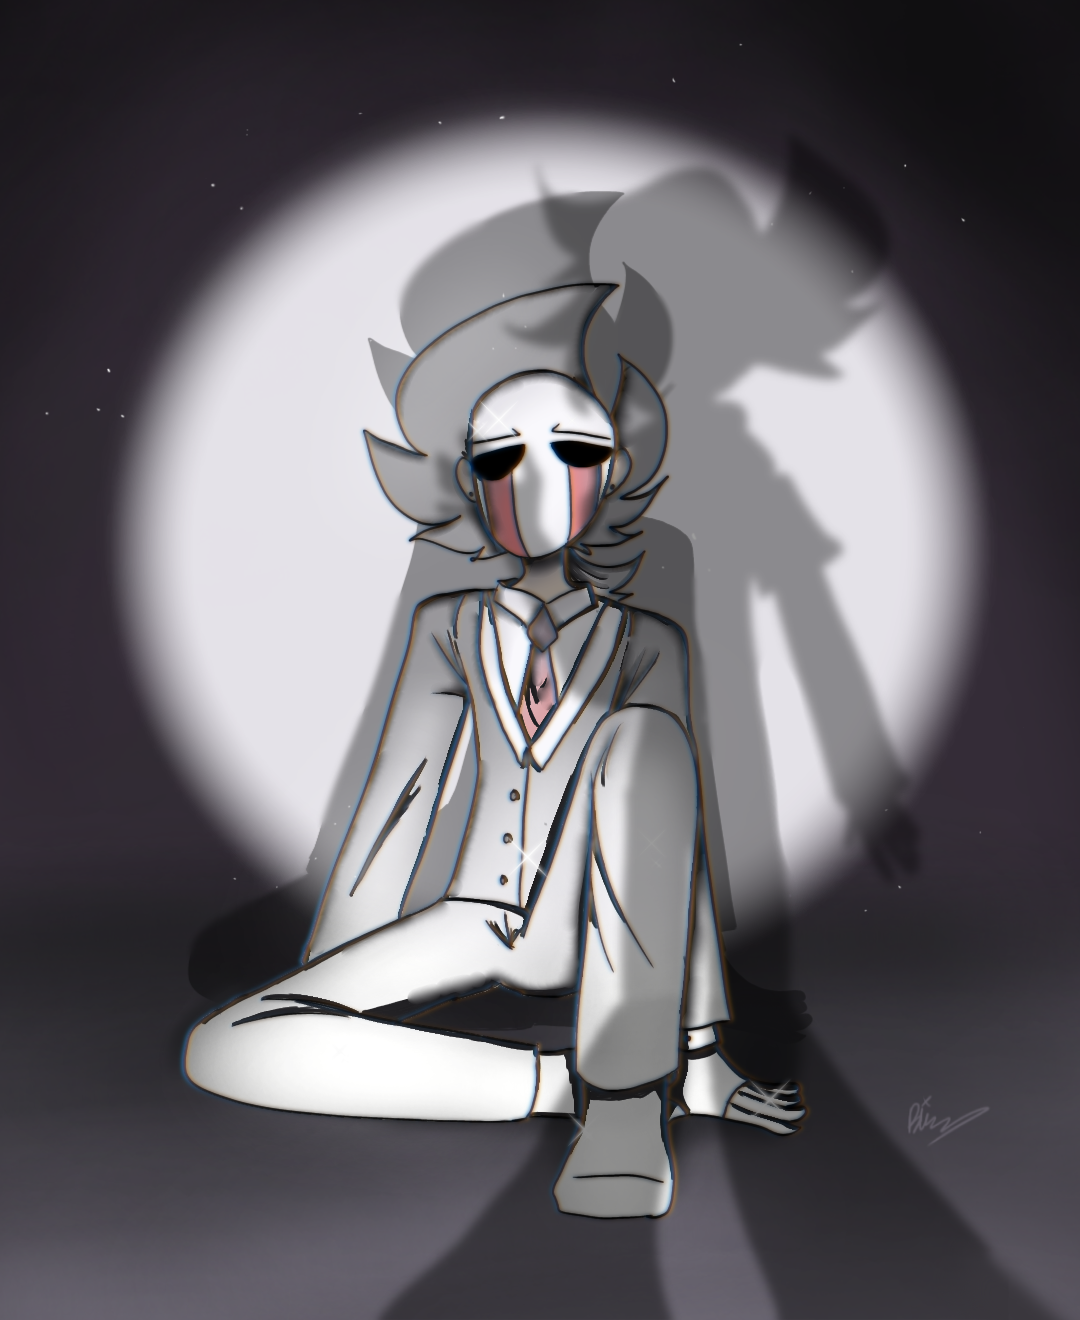 SCP-682 and SCP-079 by oldmanandcan on Tumblr : r/SCP